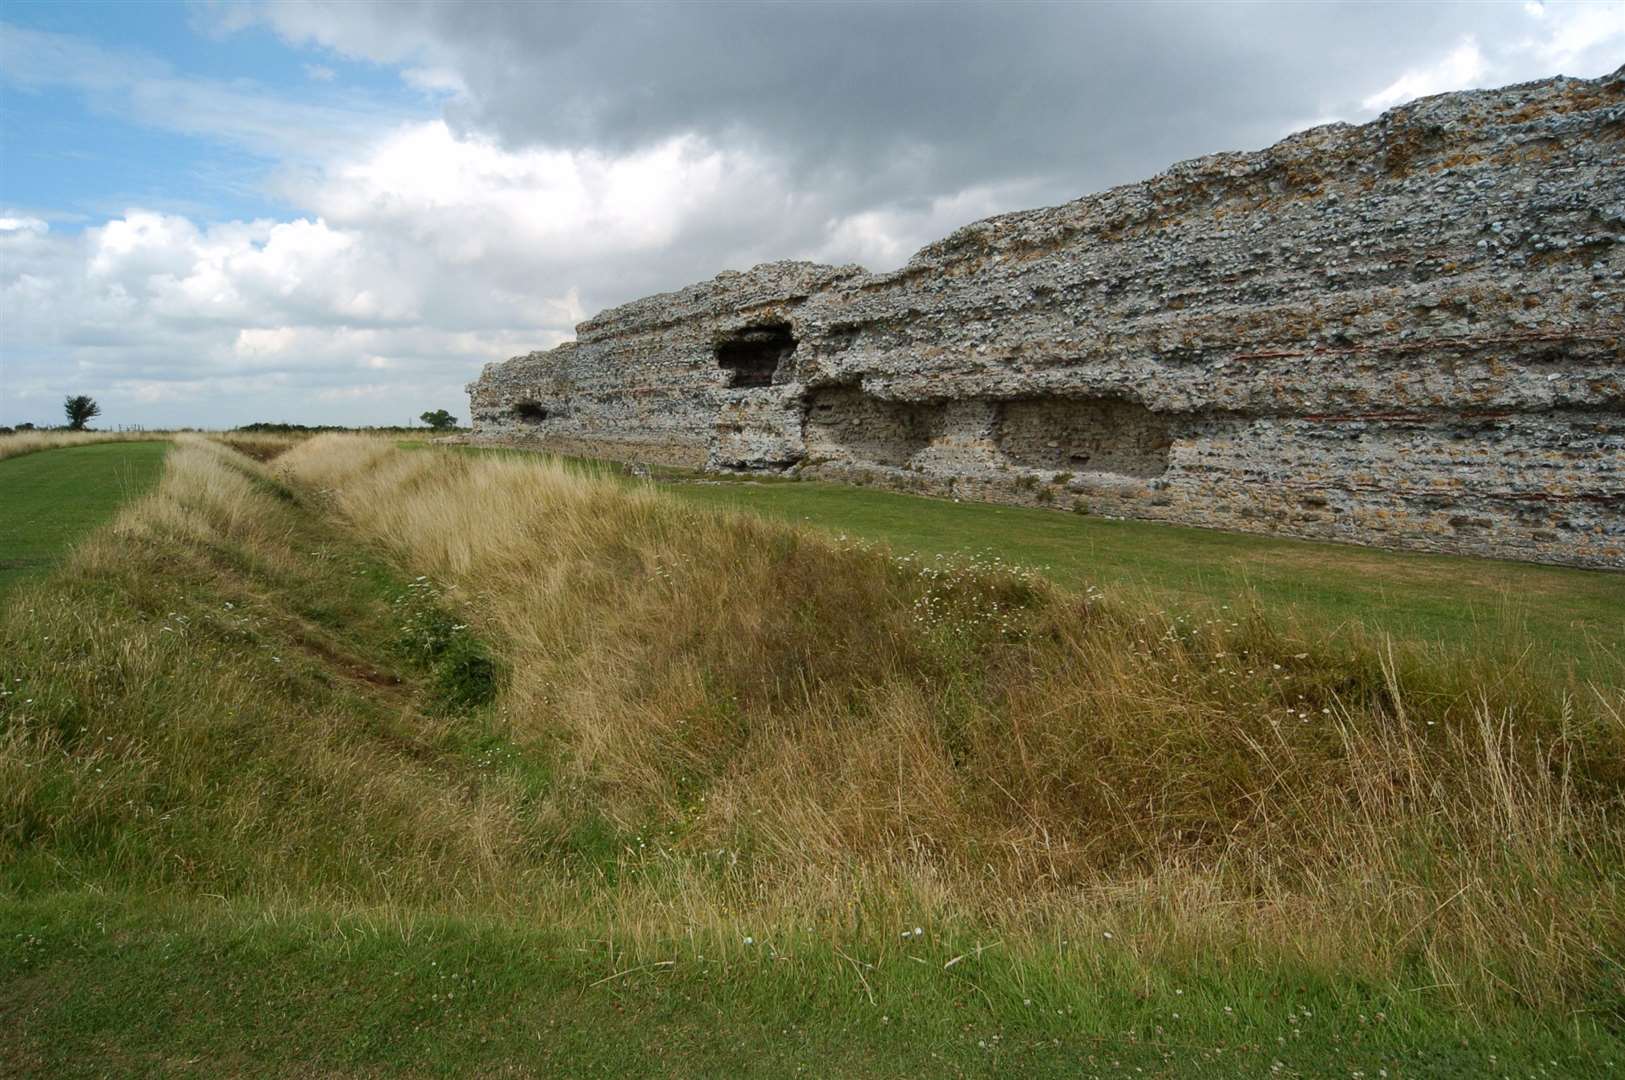 The new solar farm would be just 160 metres from Richborough Roman Fort